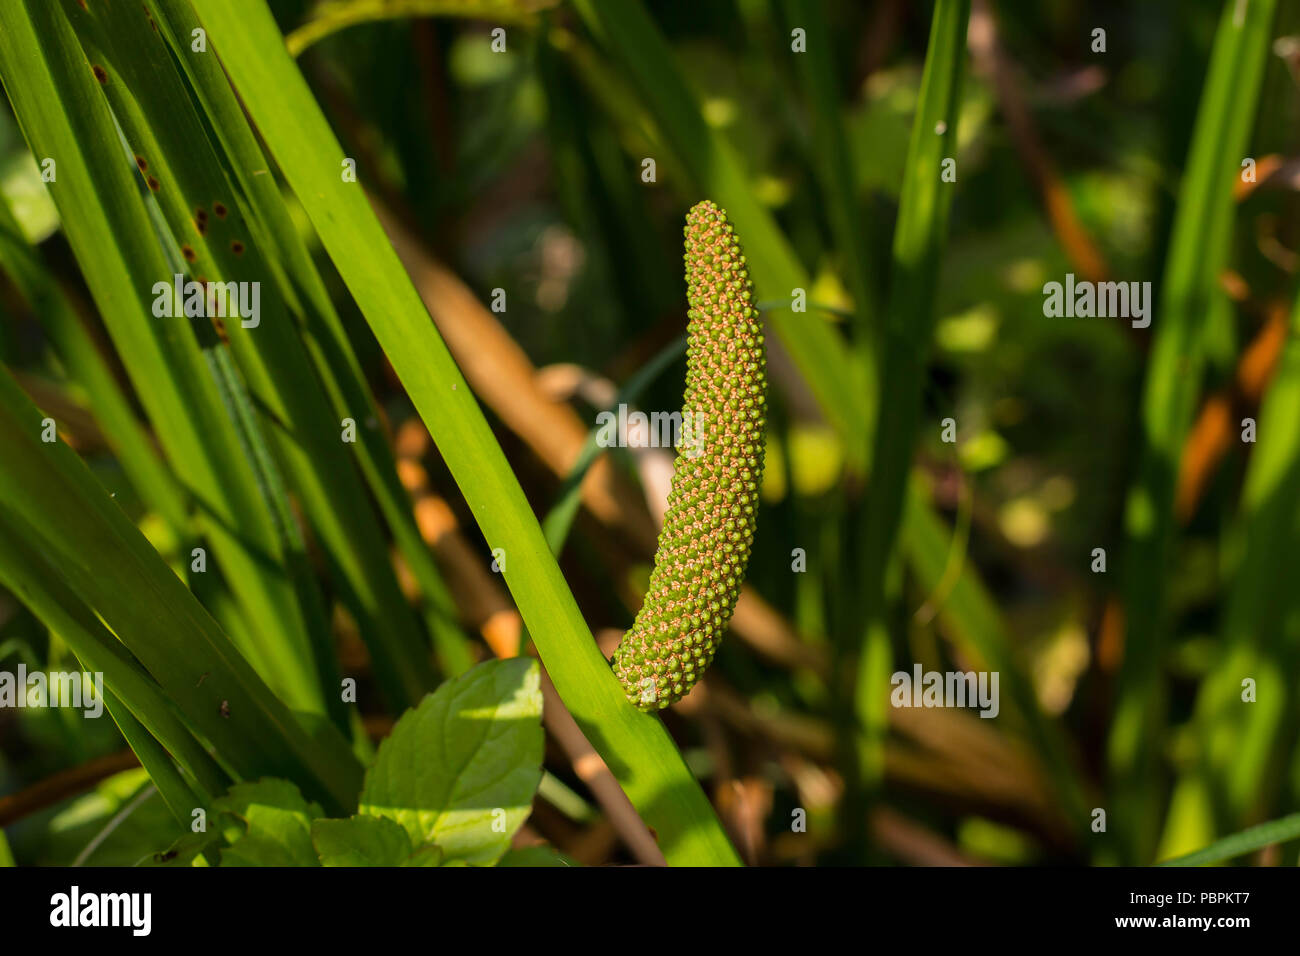 Inflorescence of sweet flag (Acorus calamus) with young fruits Stock Photo